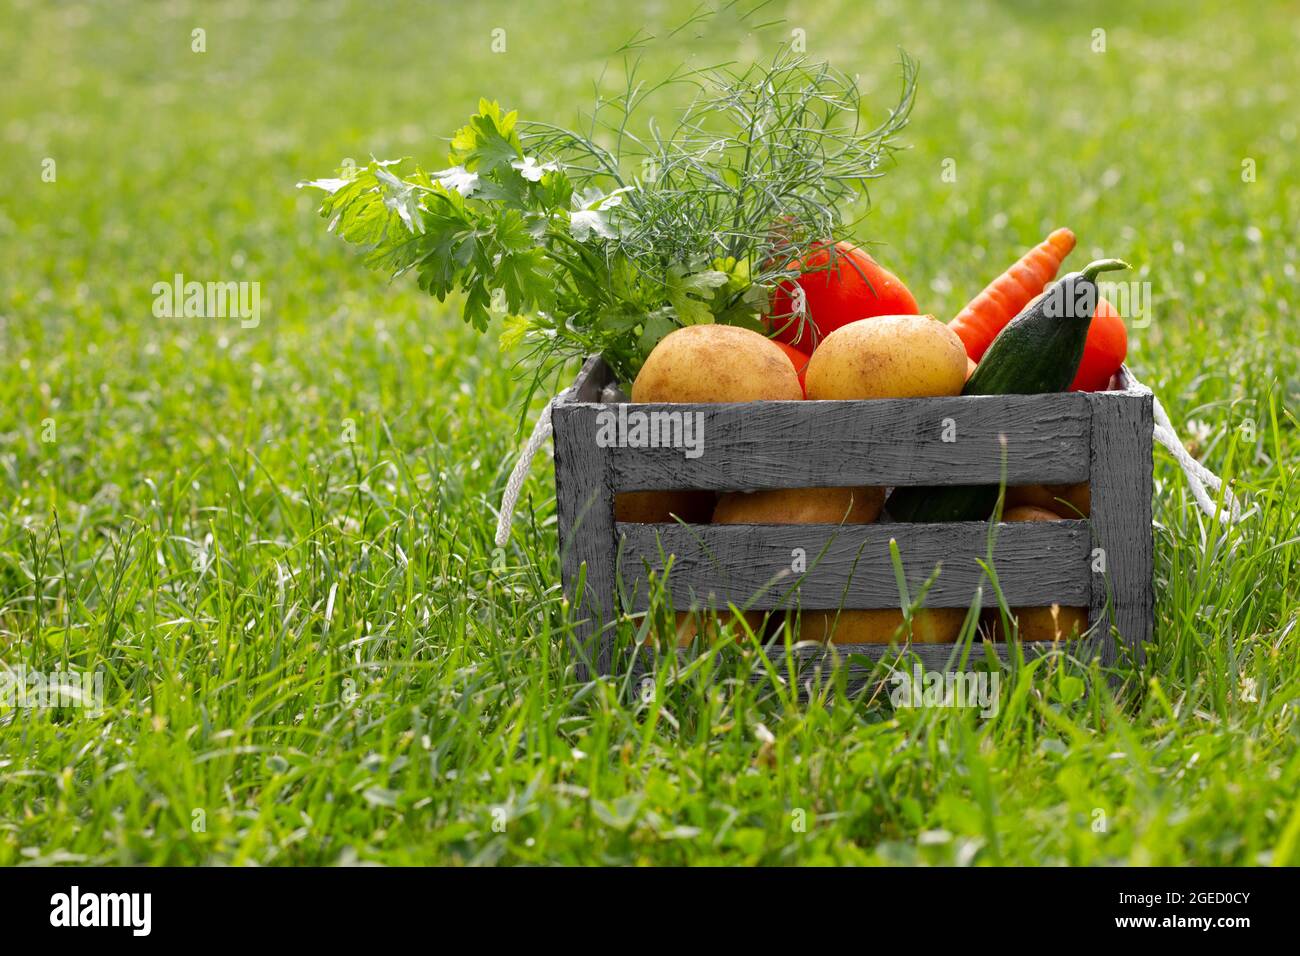 azzly colored vegetables in a box on the grass Stock Photo